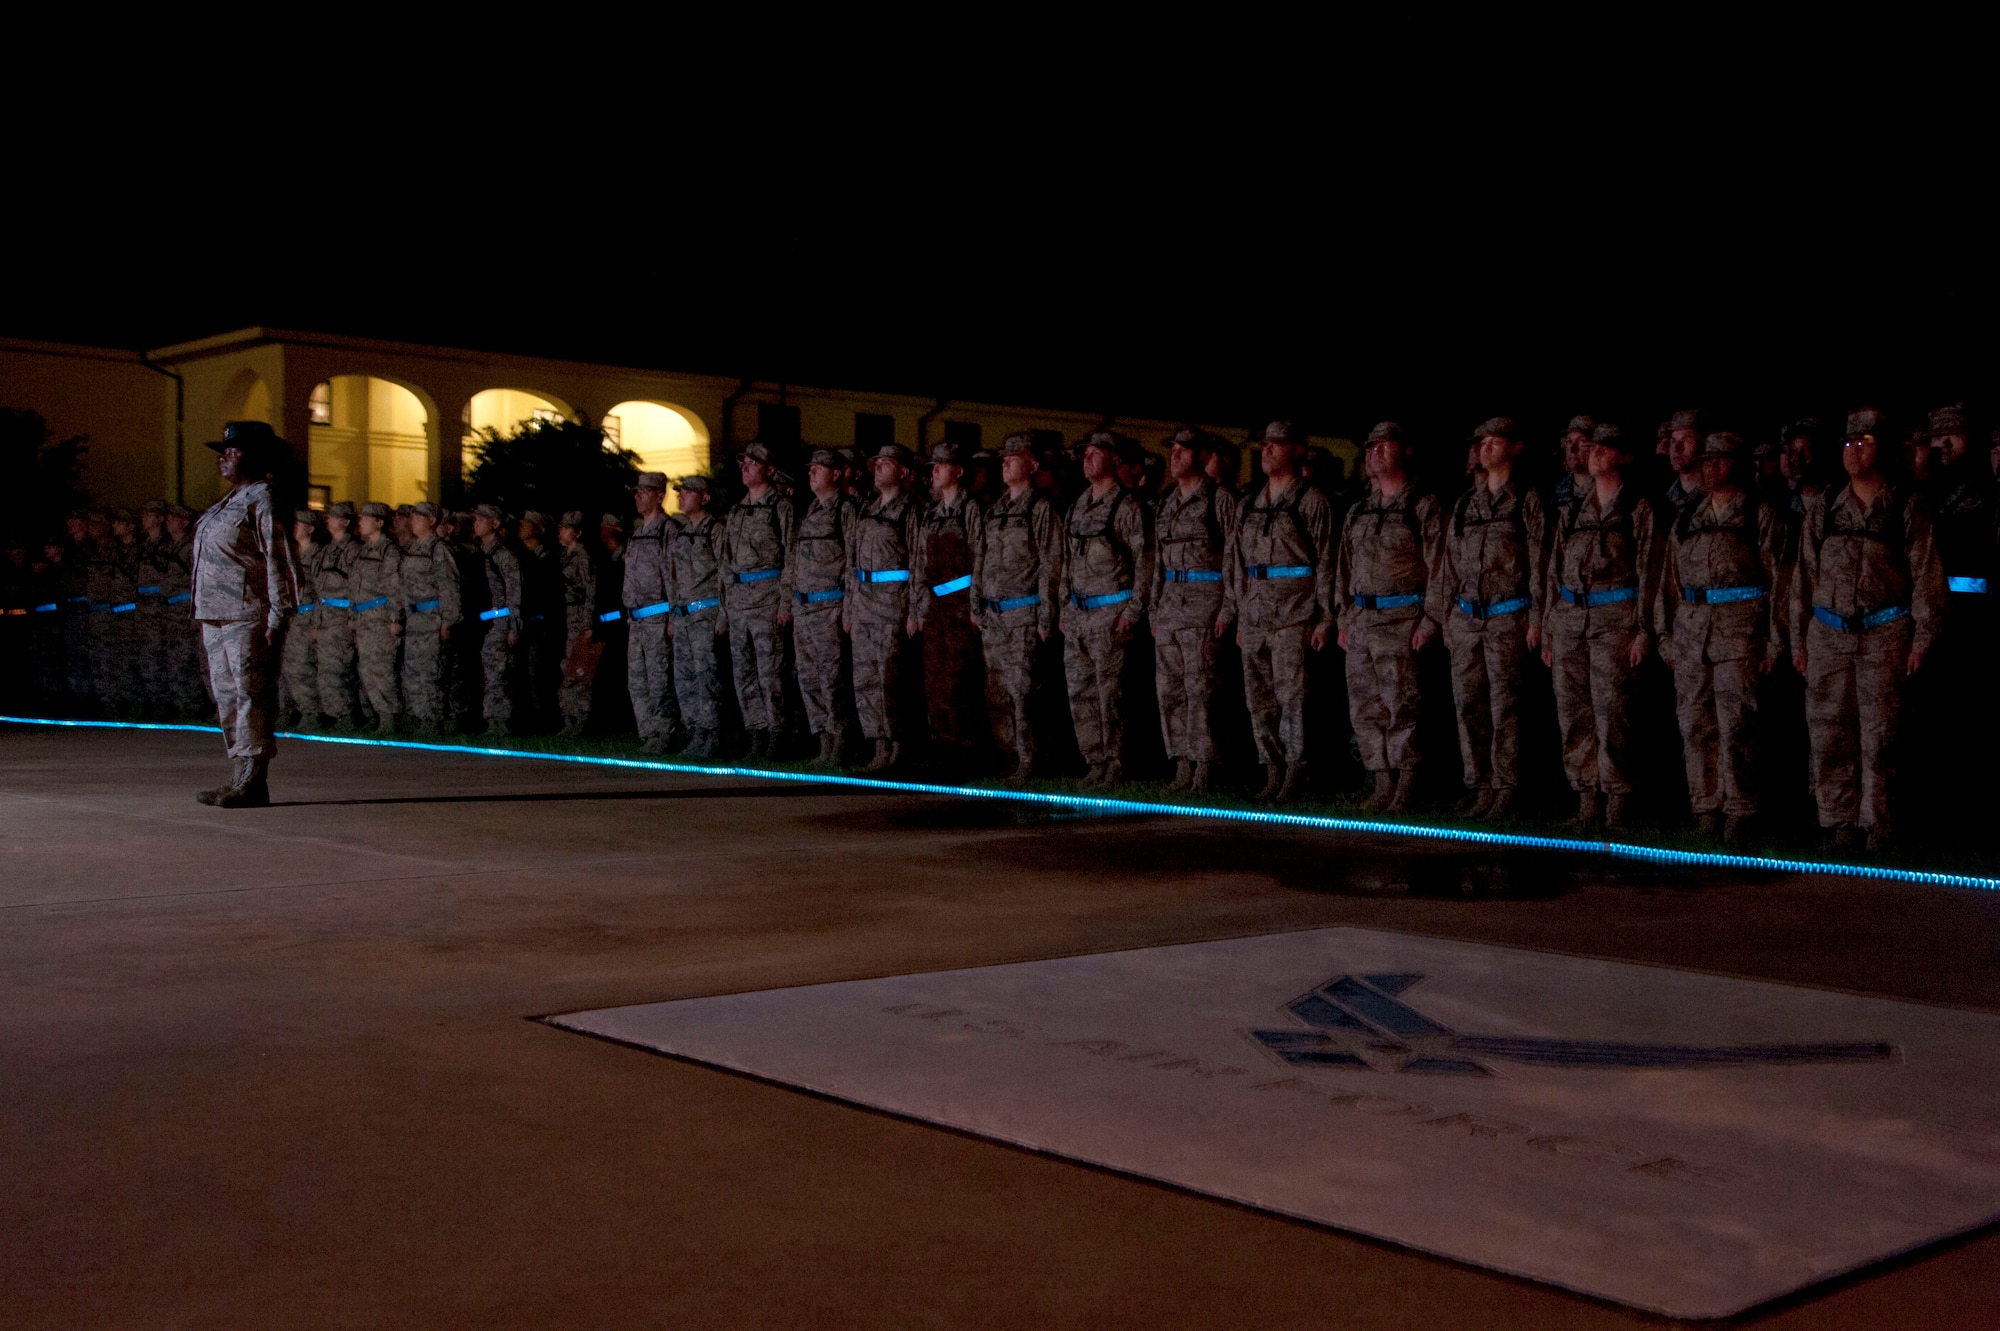 As the U.S. Air Force nears its 67th birthday, the first class of Active, Guard and Reserve Officer Training School cadets cross the blue line into the Air Force July 19, 2014, at Maxwell Air Force Base. This is the first time that all three service components have crossed the blue line together.The blue line is a ceremony held for every class to affirm their commitment to the U.S. Air Force and its core values. (U.S. Air Force photo by Staff Sgt. Natasha Stannard)